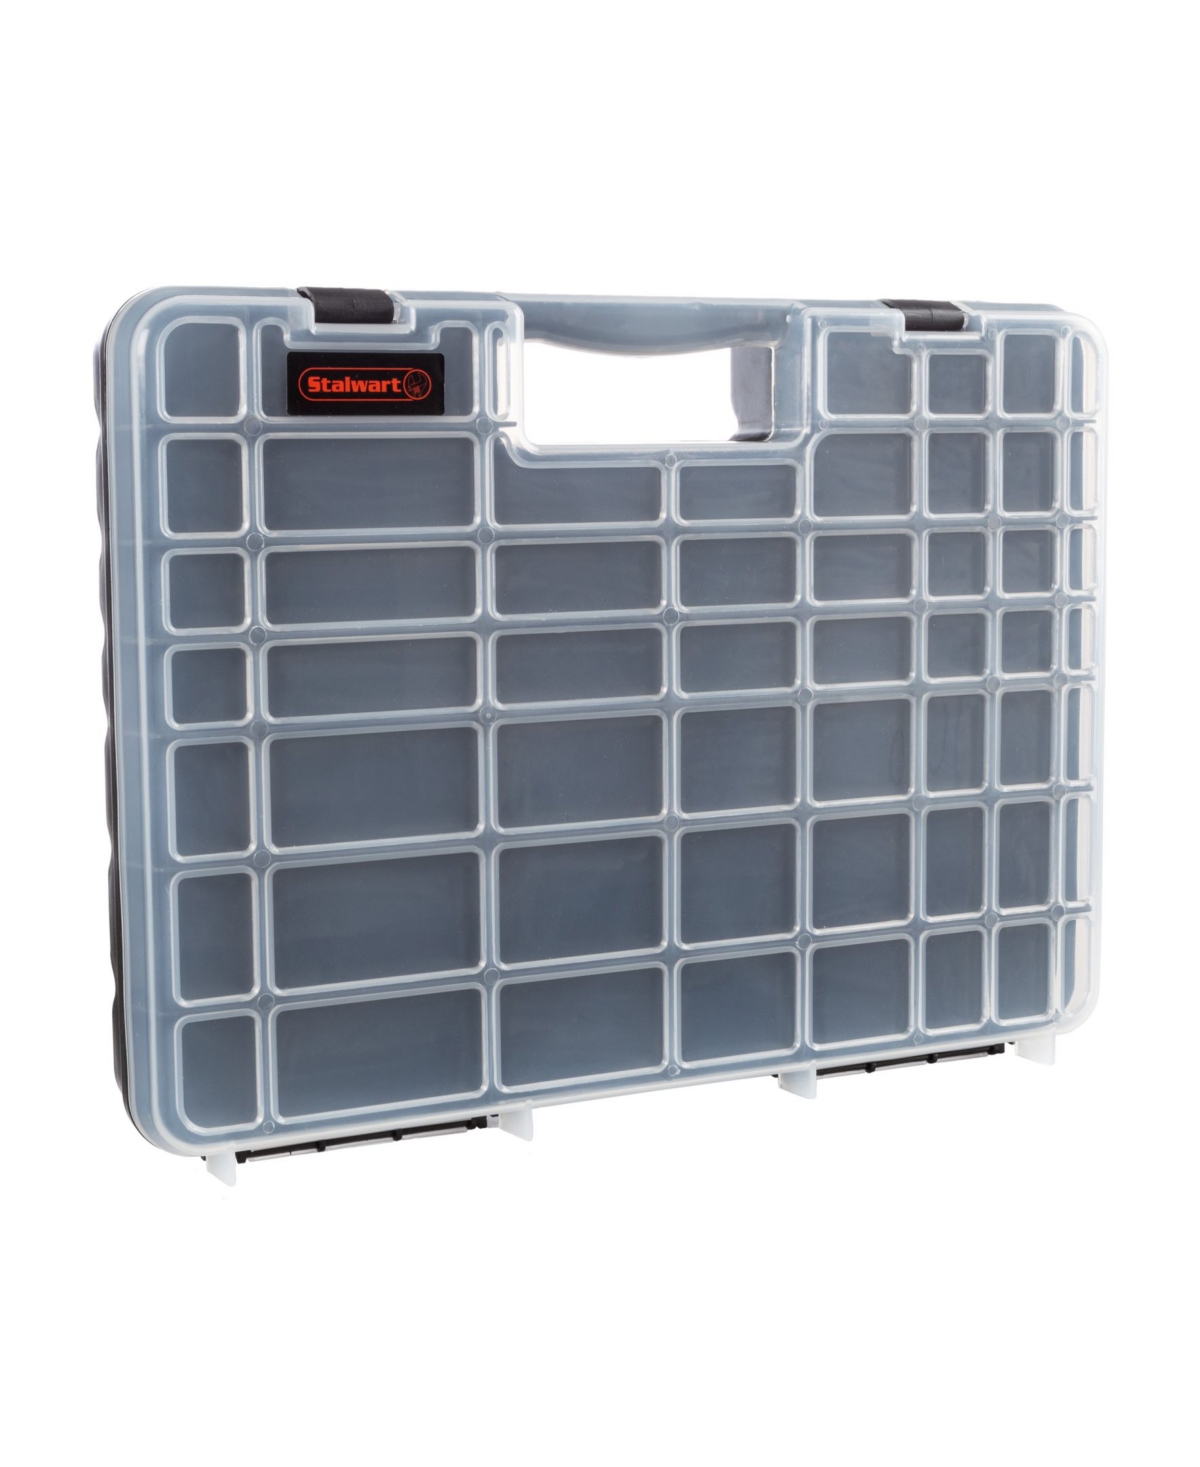 Portable Storage Case with Secure Locks and 55 Small Bin Compartments by Stalwart - Black